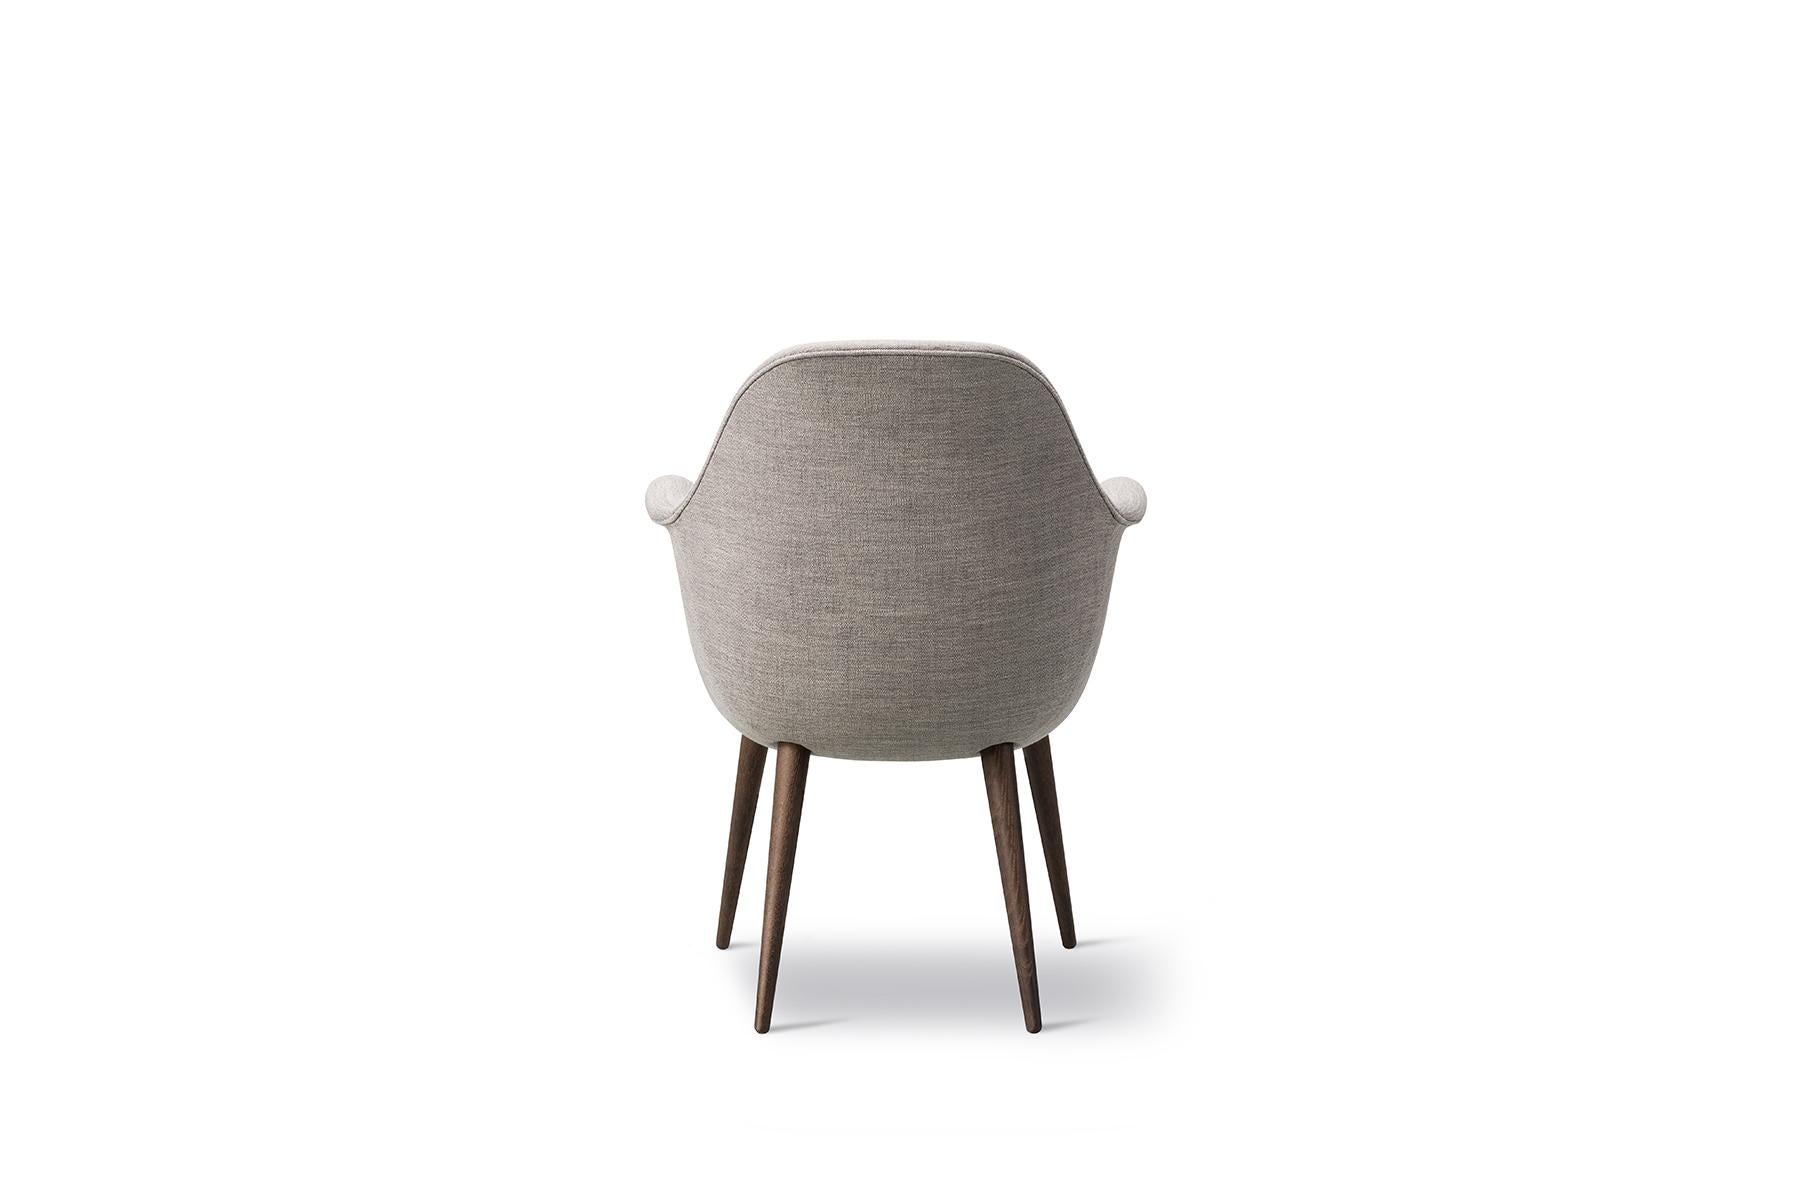 The Swoon chair is the smallest upright version of Swoon, is a size that’s even more compact. With its singular shell merging the armrests, seat and back, in addition to the supportive, soft cushions and choice of solid wood, you have a subtle,